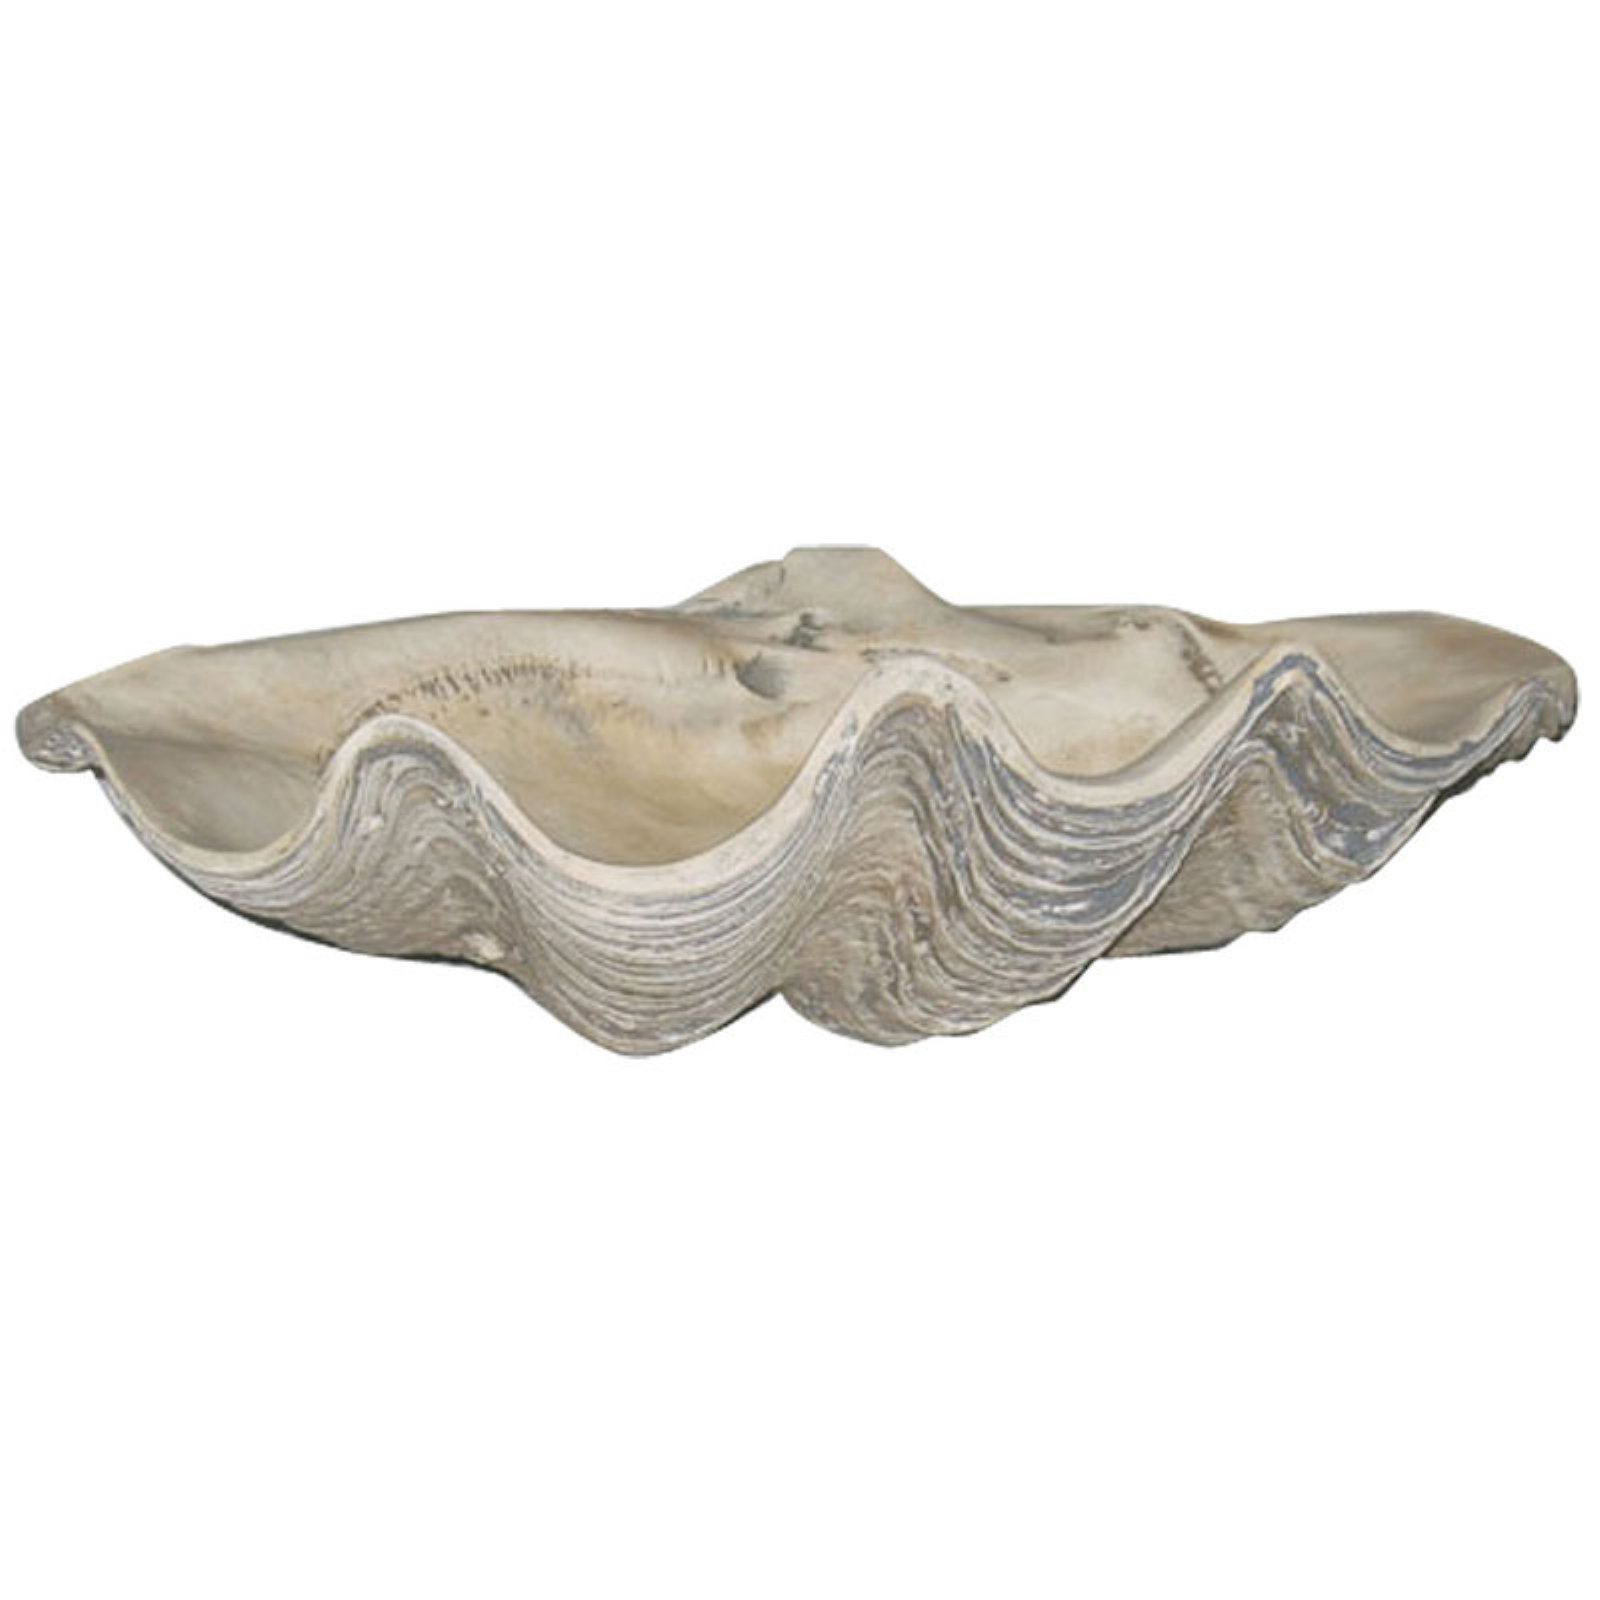 House Parts Large Clam Shell - image 1 of 1